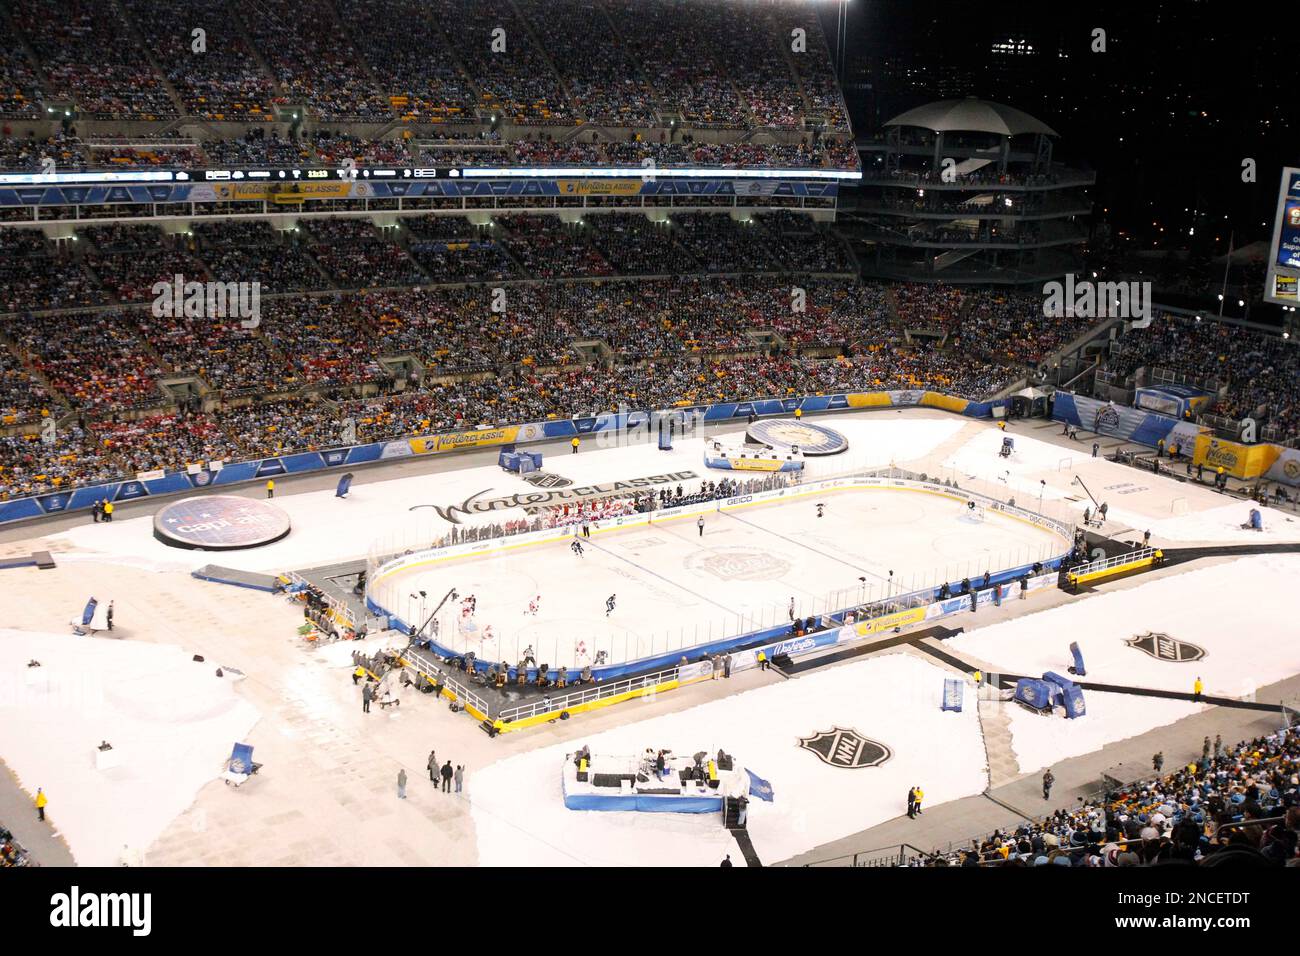 Over 60,000 people jam Heinz Field to watch the NHL Winter Classic hockey game between the Pittsburgh Penguins and the Washington Capitals in Pittsburgh, Saturday, Jan